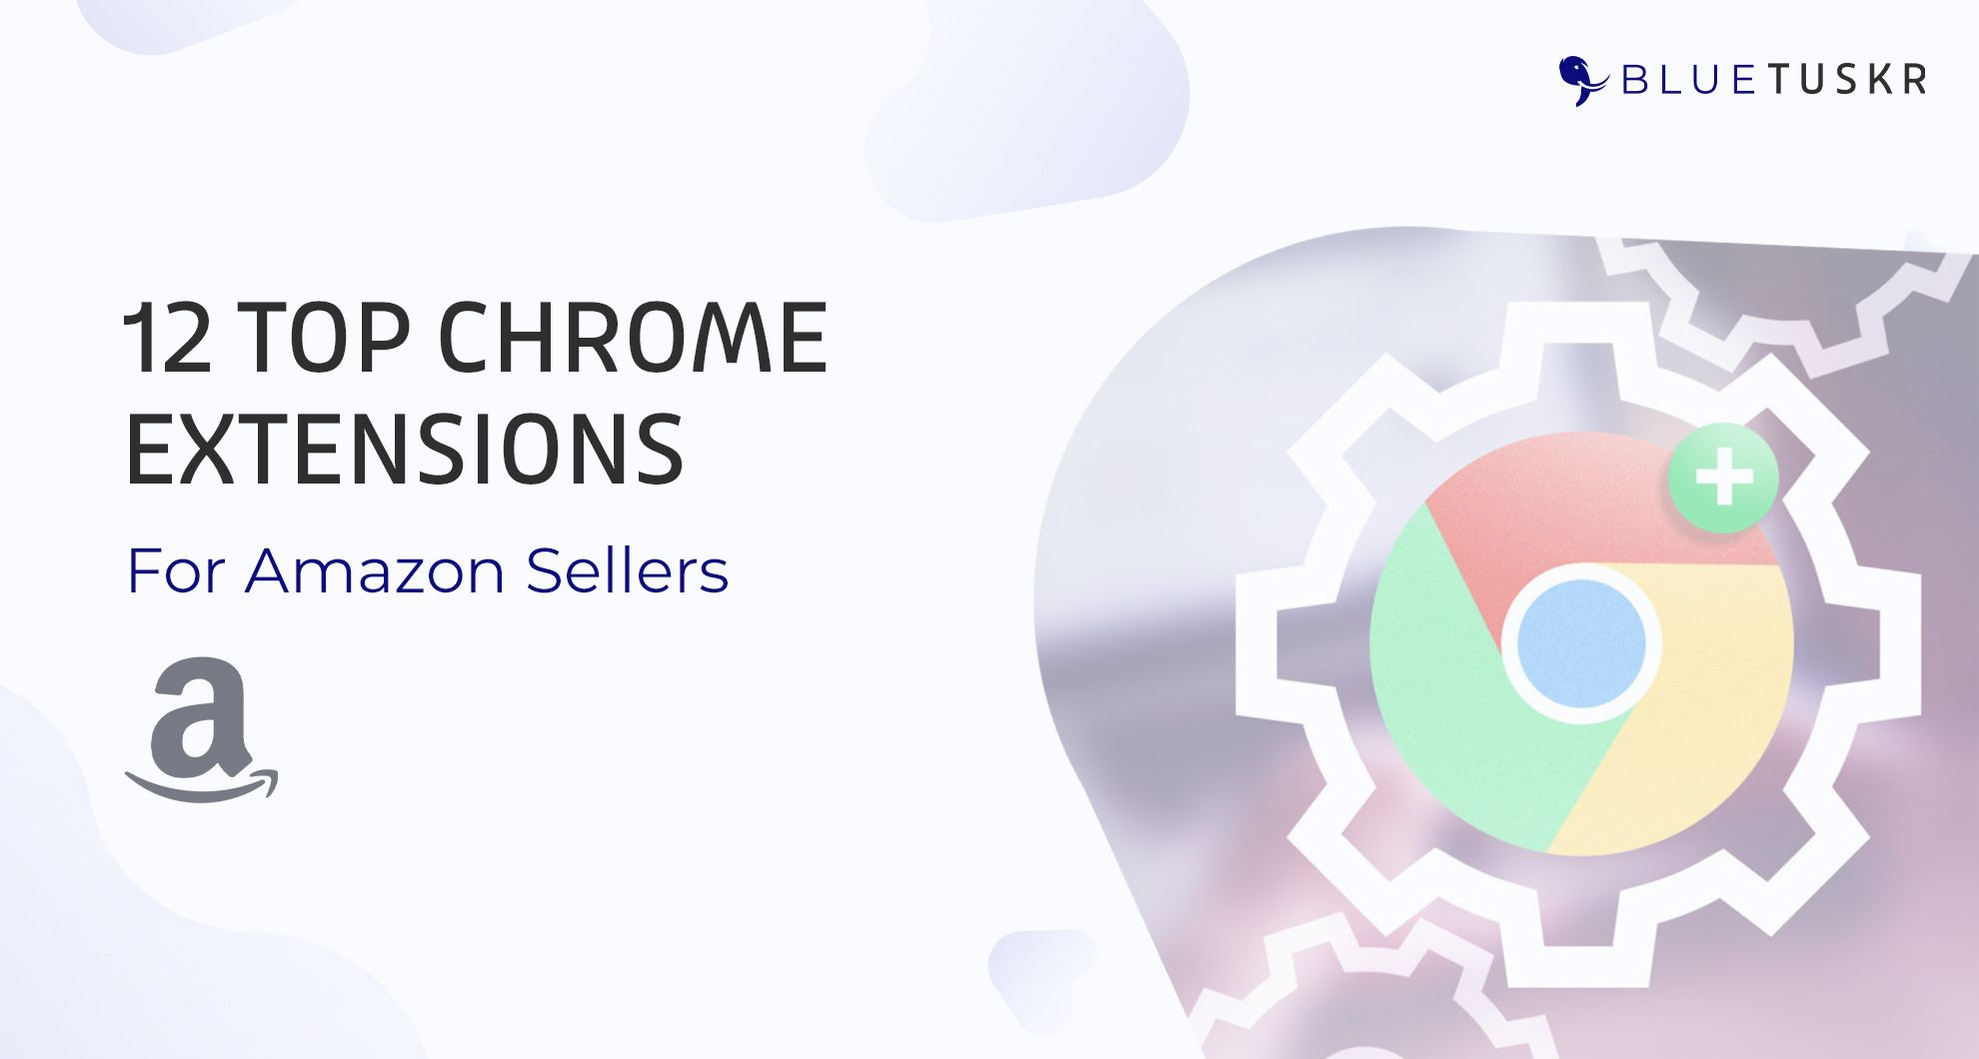 12 Top Chrome Extensions for Amazon Sellers (Updated 2020)